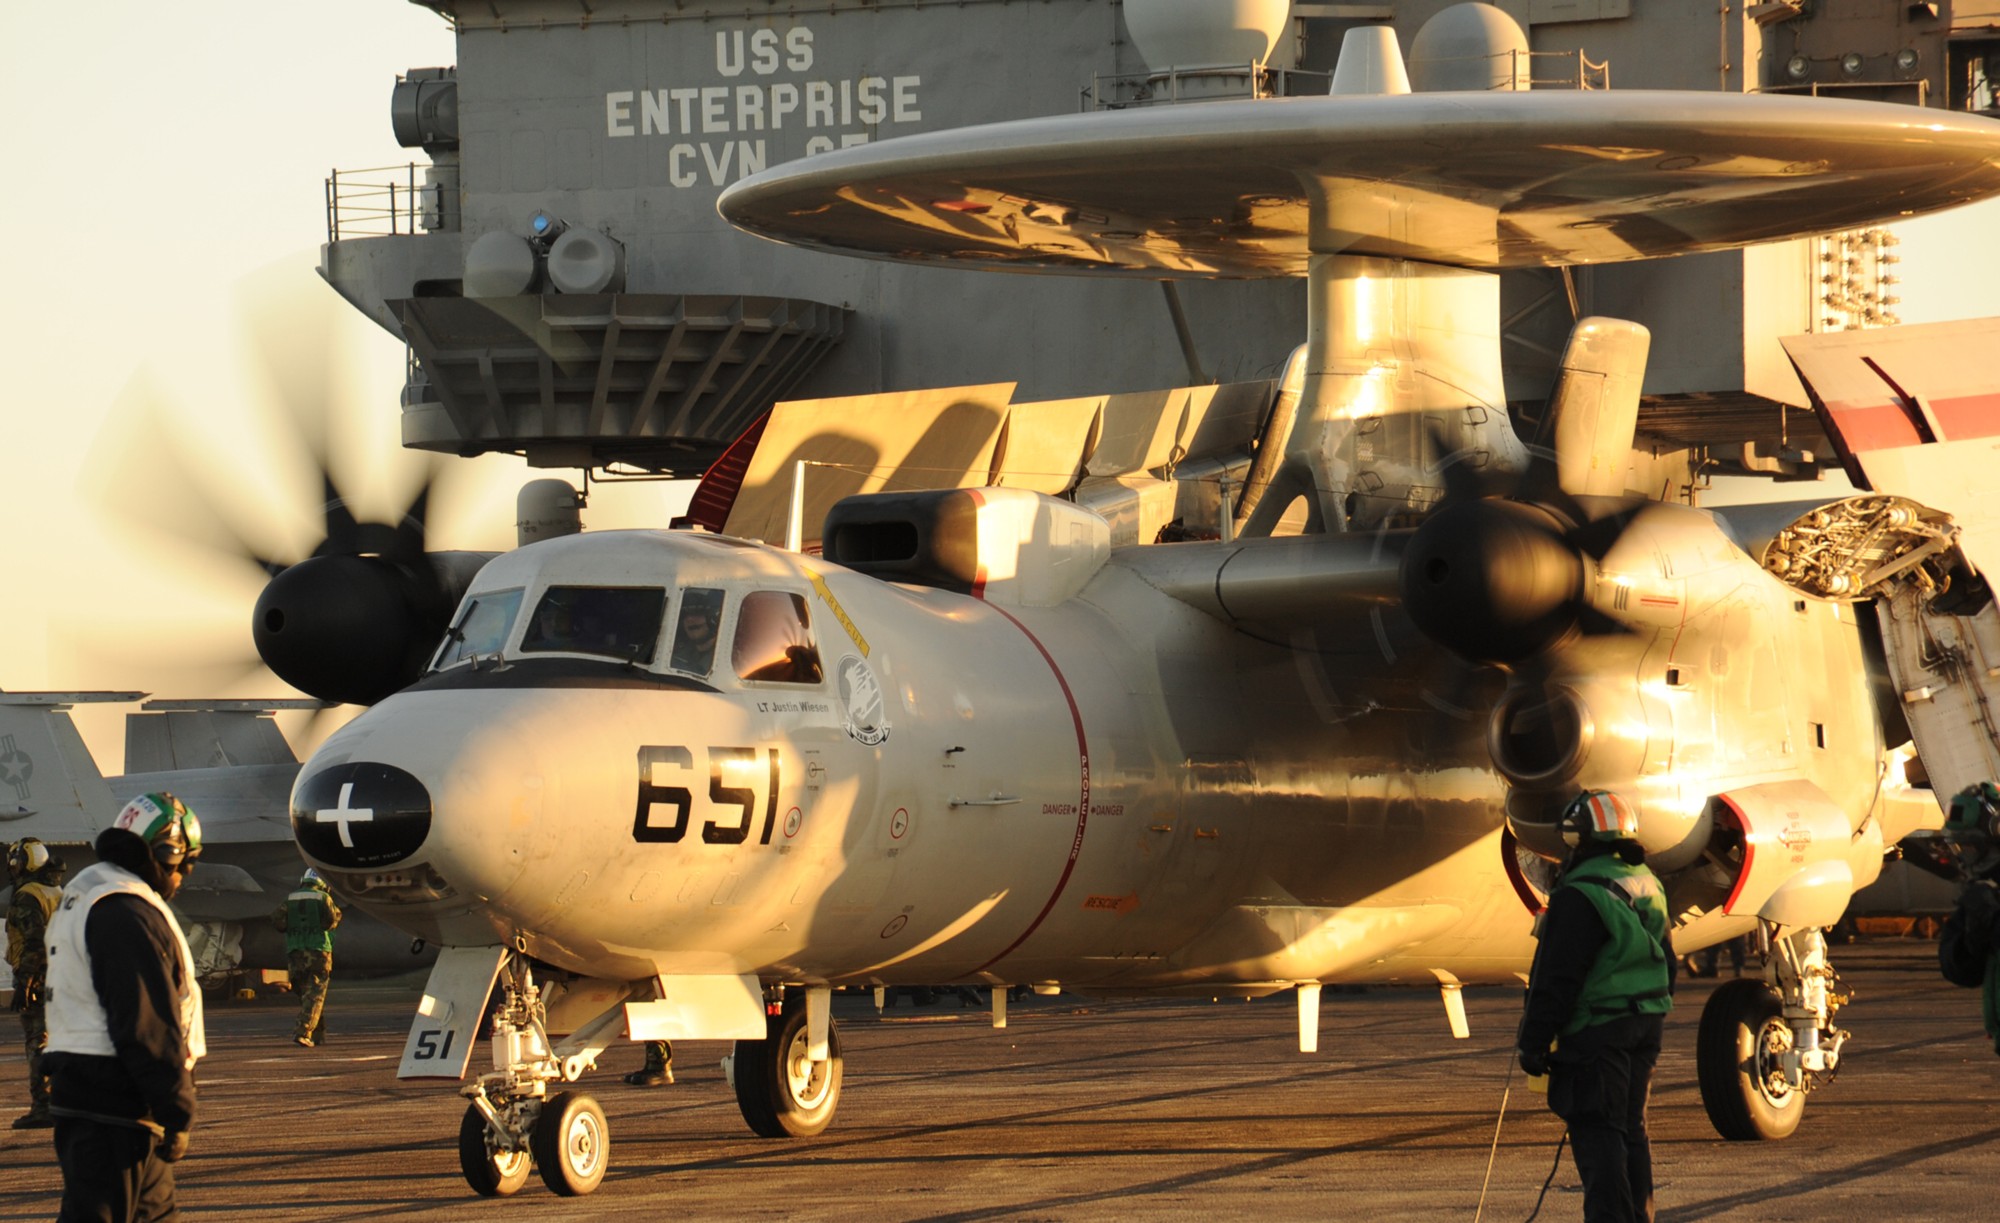 vaw-120 greyhawks carrier airborne early warning squadron e-2c hawkeye replacement uss enterprise cvn-65 91